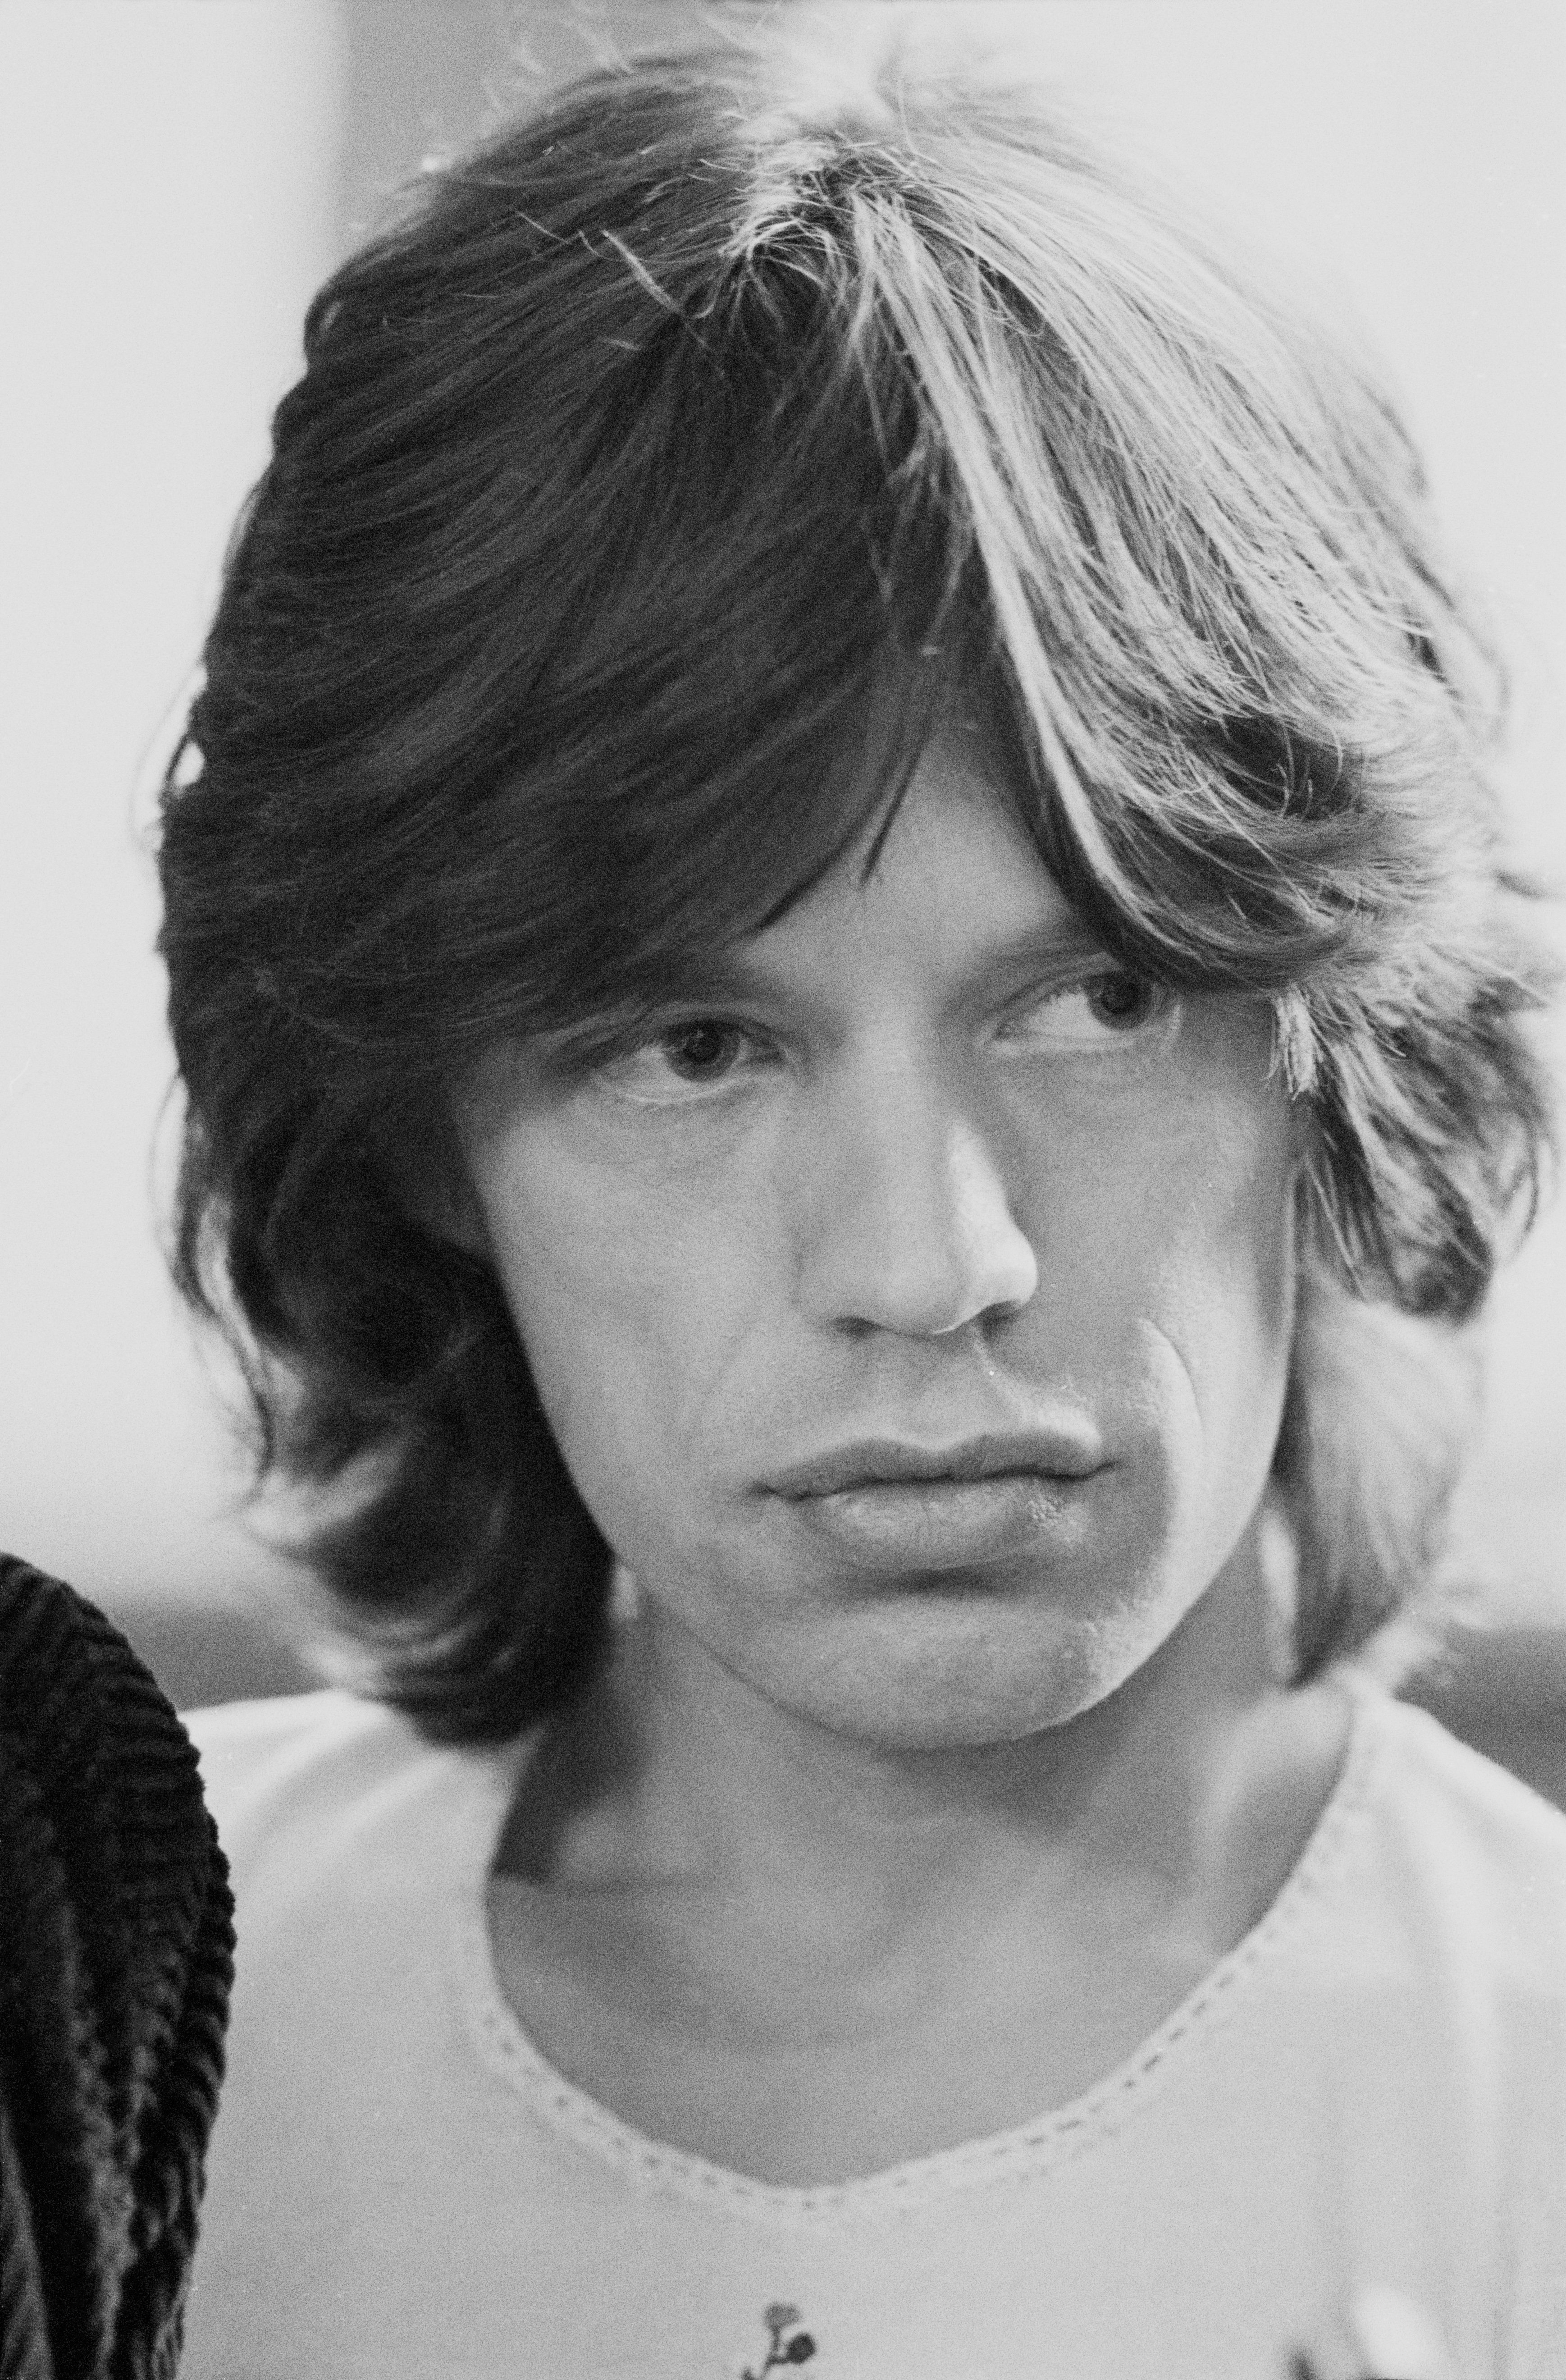 English singer Mick Jagger in London, 1972. | Source: Getty Images